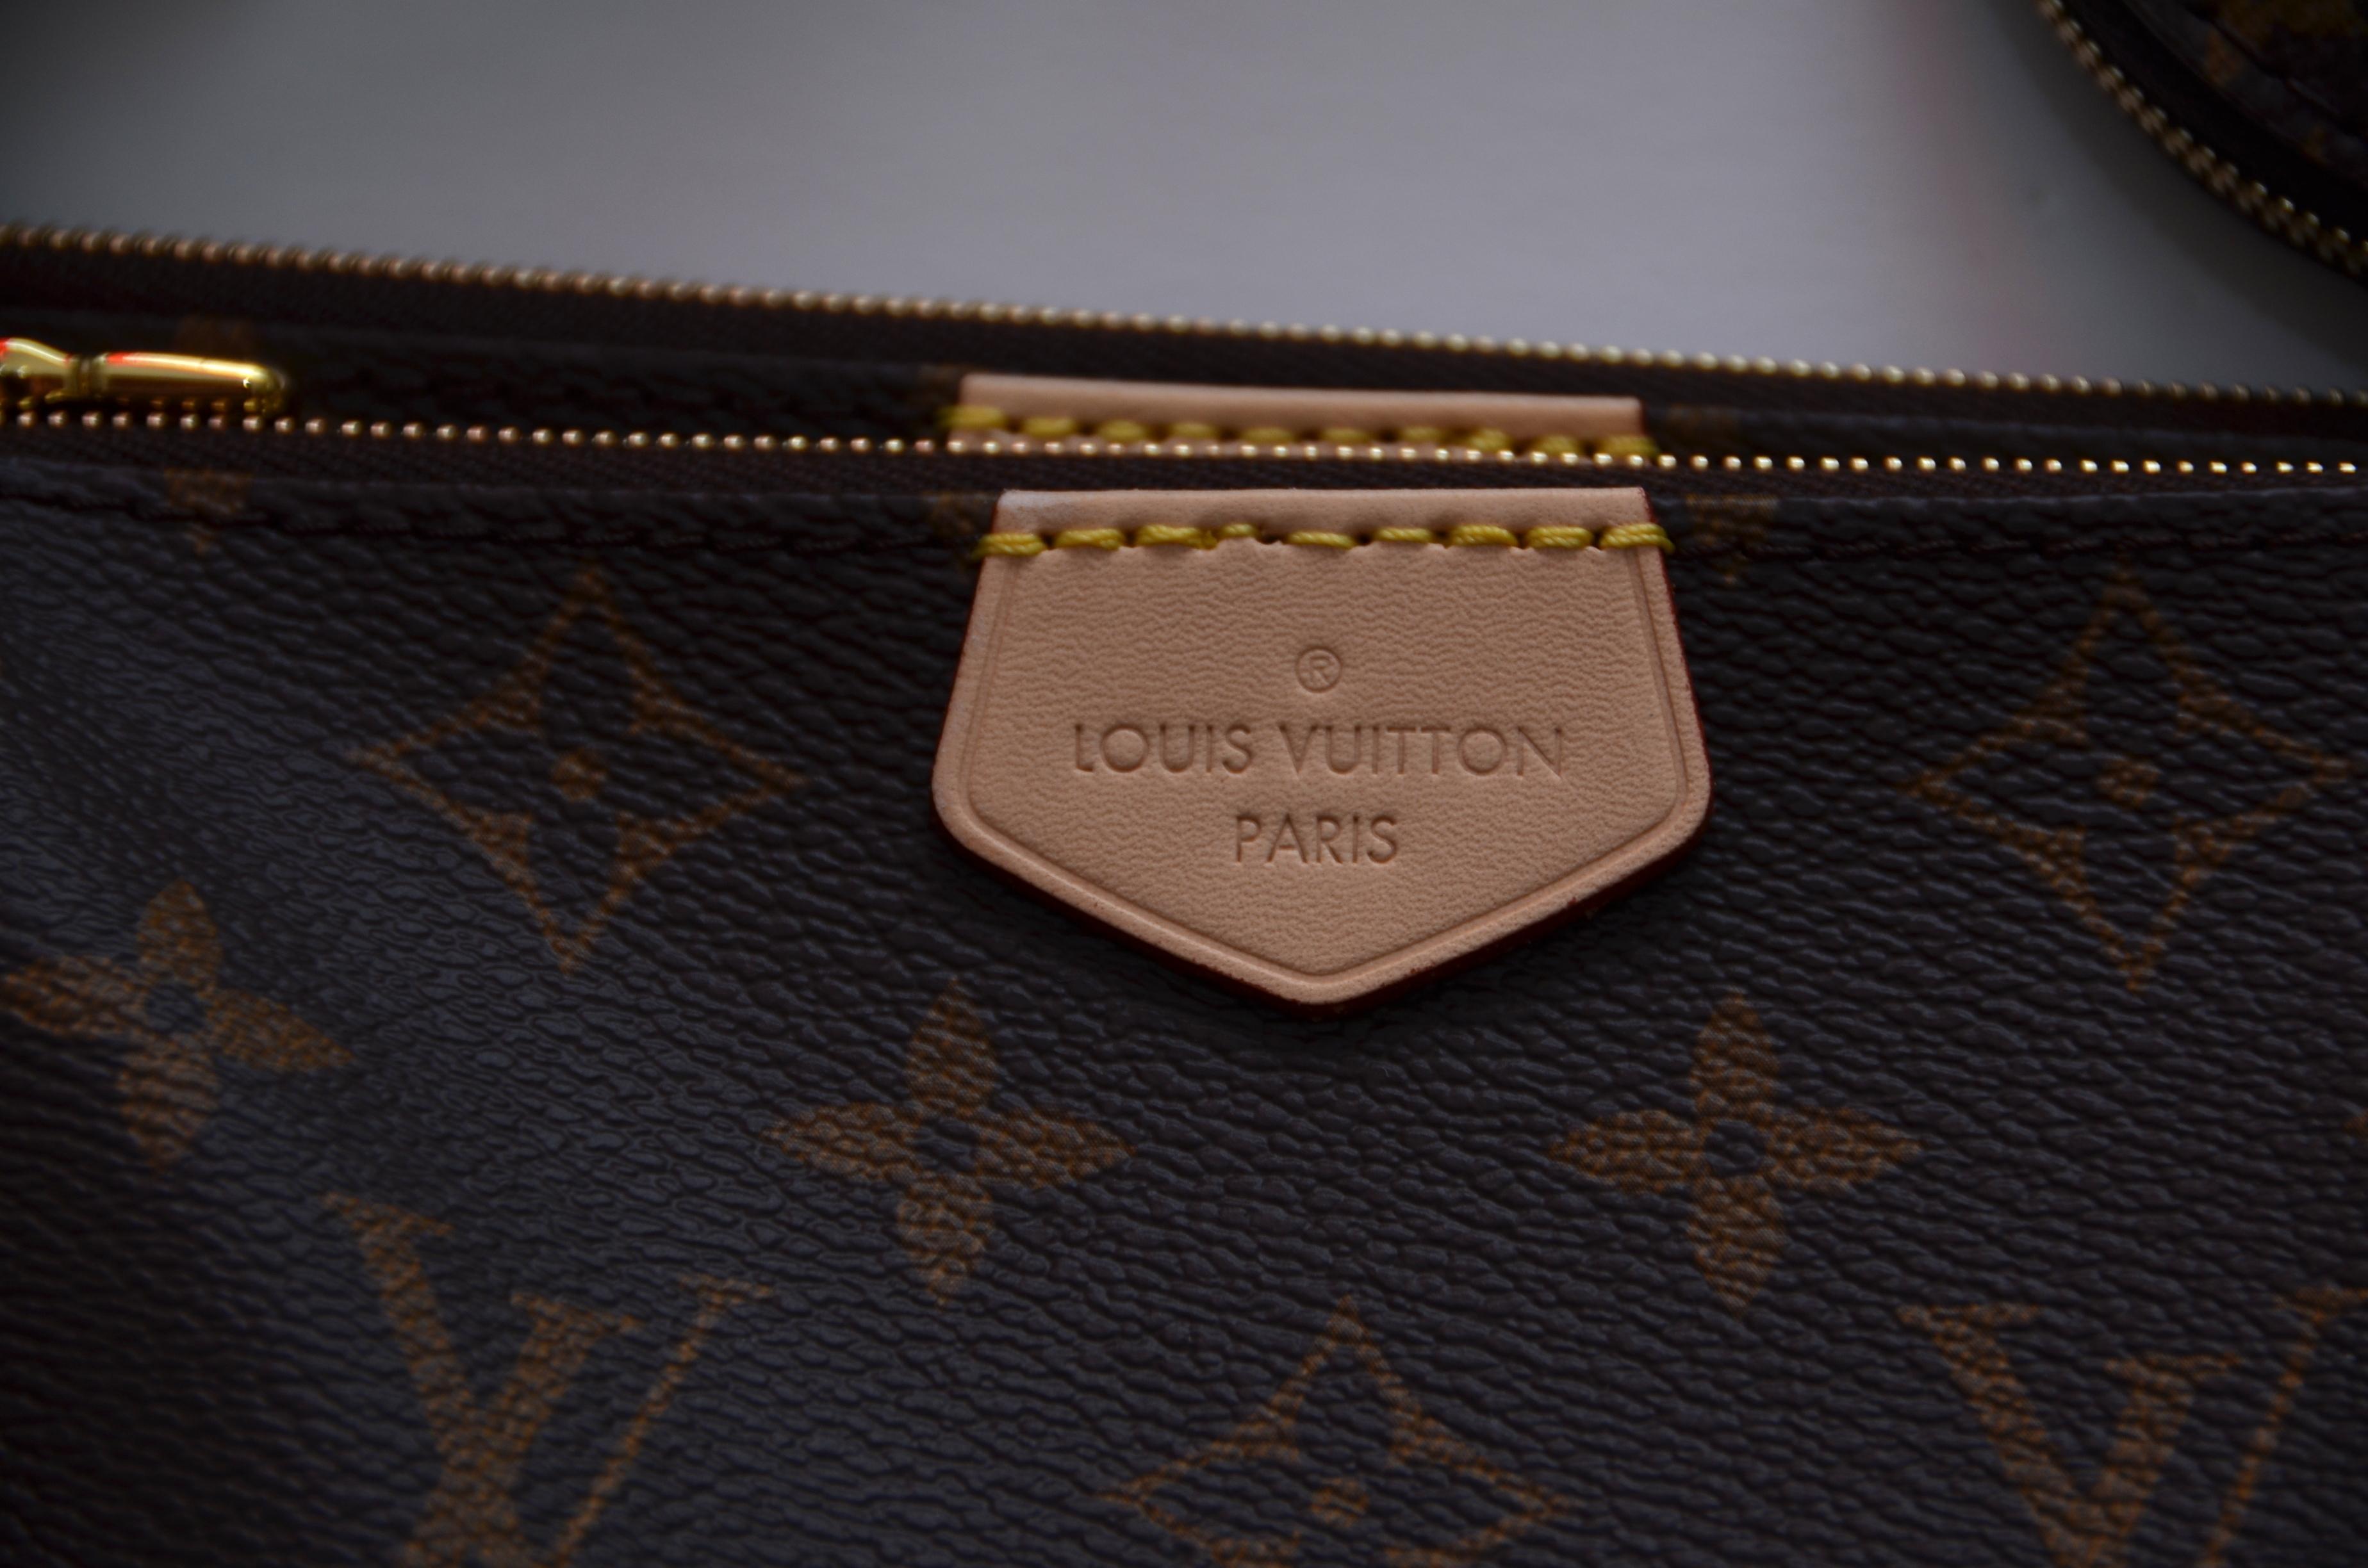 We guarantee this is an authentic LOUIS VUITTON Monogram Multi Pochette Accessories handbag. This chic crossbody bag is crafted of monogram coated canvas and features a removable canvas strap and gold hardware. The top zipper opens to a brown fabric